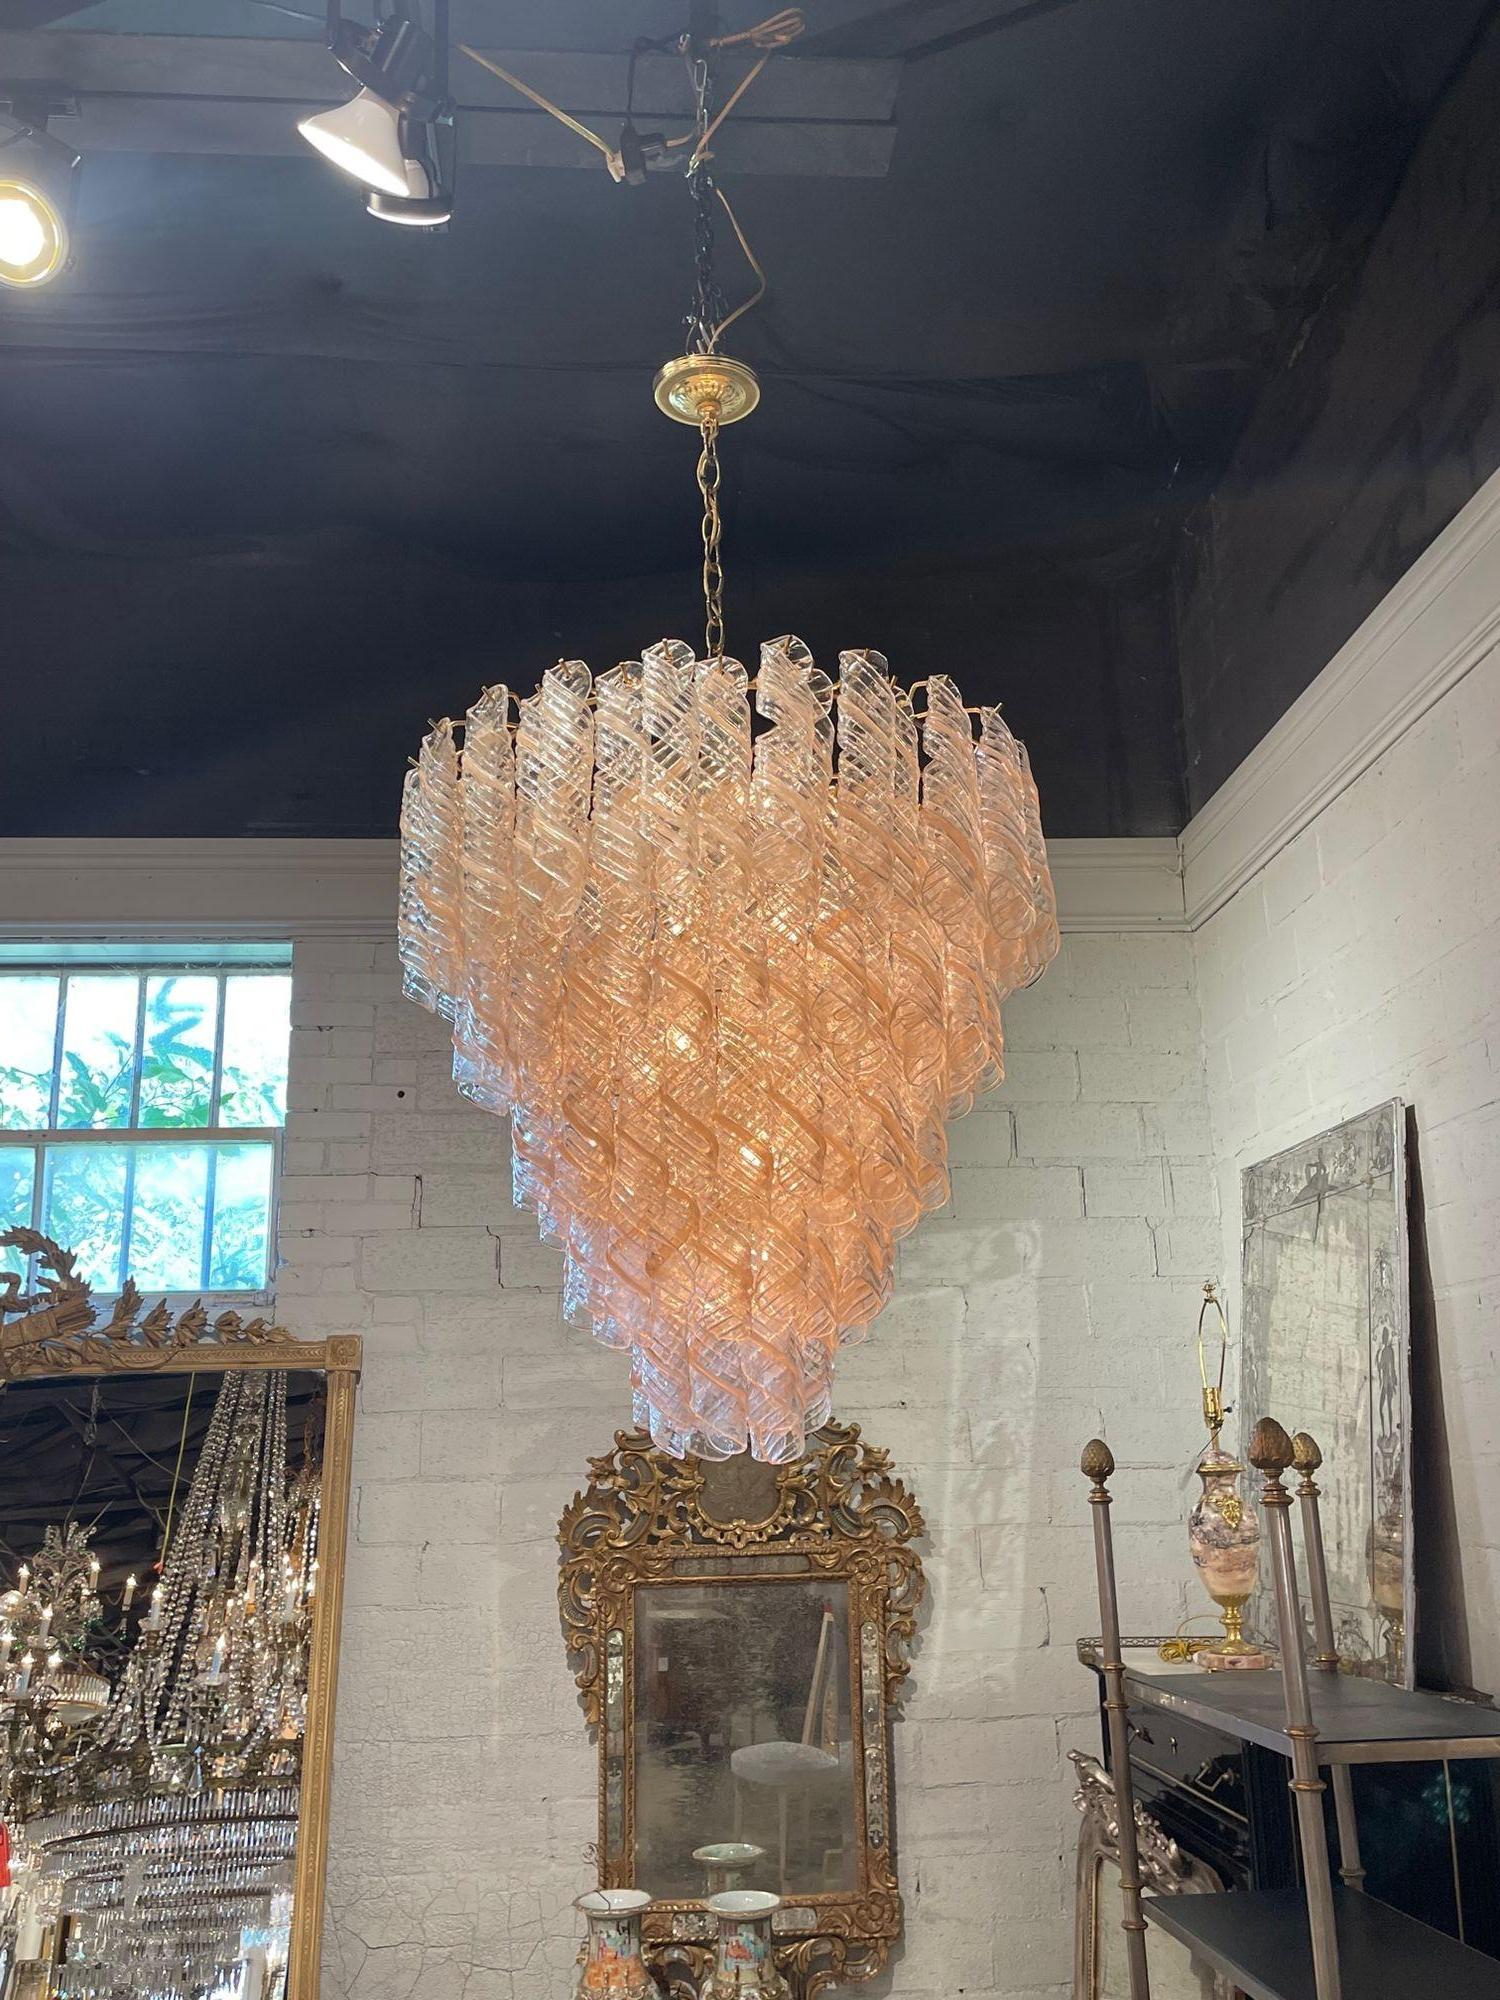 Gorgeous vintage spiral blush colored Murano glass chandelier. Beautiful subtle color along with a beautiful scale and shape. Creates a very stylish presence! Amazing!!